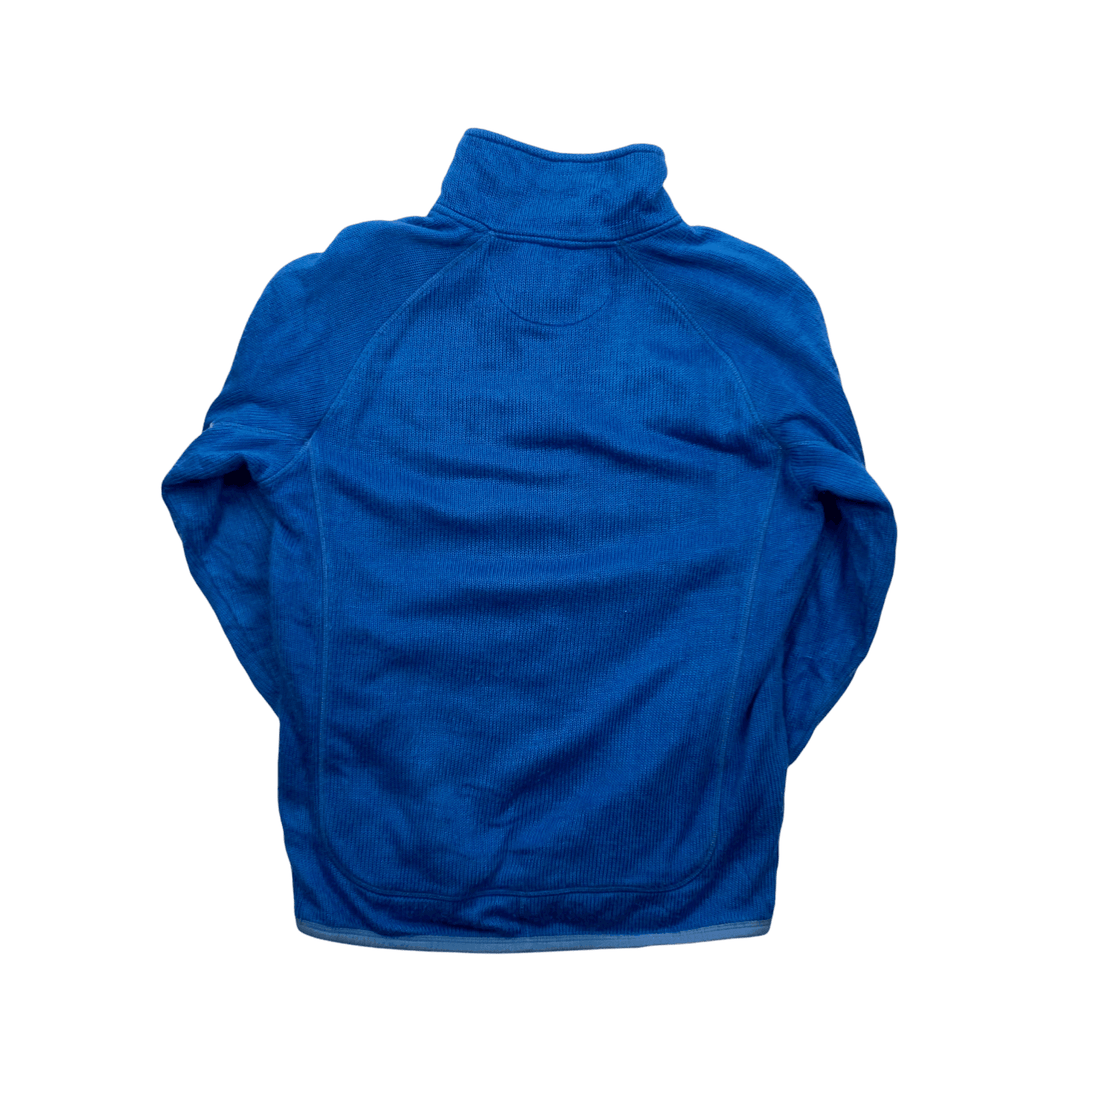 Vintage 90s Blue Kappa Italy Football Quarter Zip Fleece - Large (Recommended Size - Small) - The Streetwear Studio